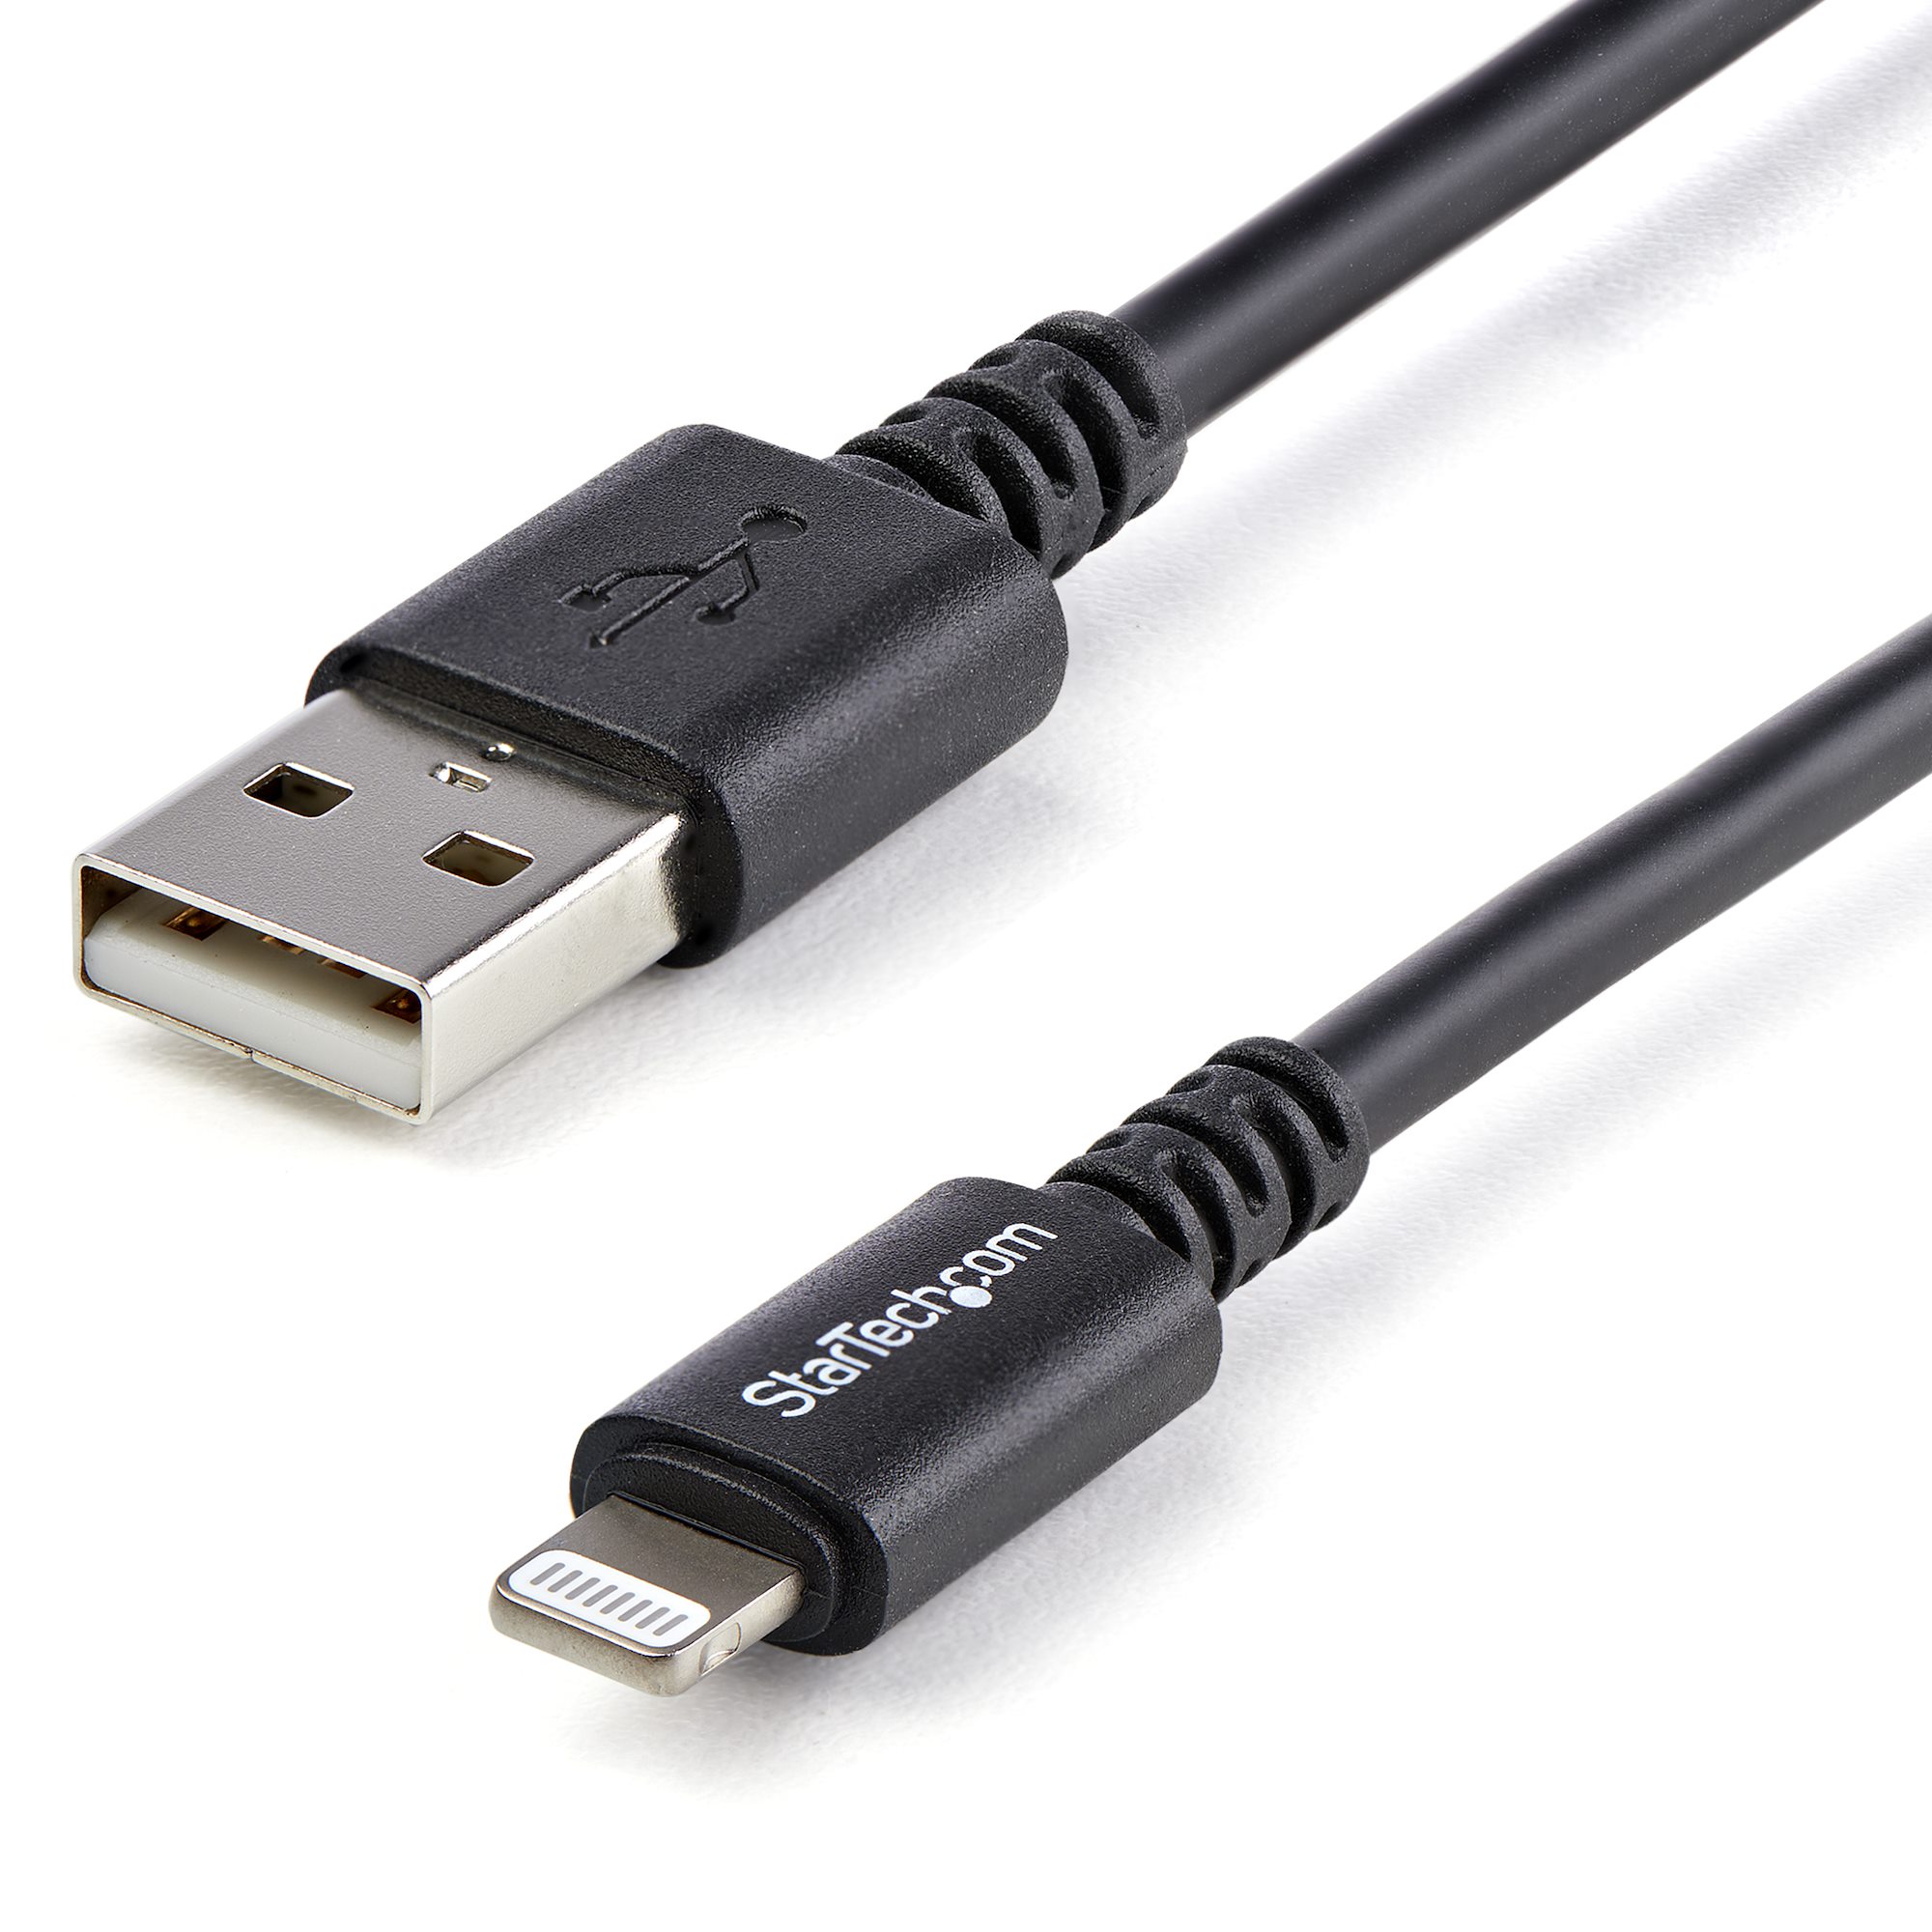 StarTech.com 3m 10 ft USB C to USB C Cable M/M - USB 2.0 - USB Type C Cable